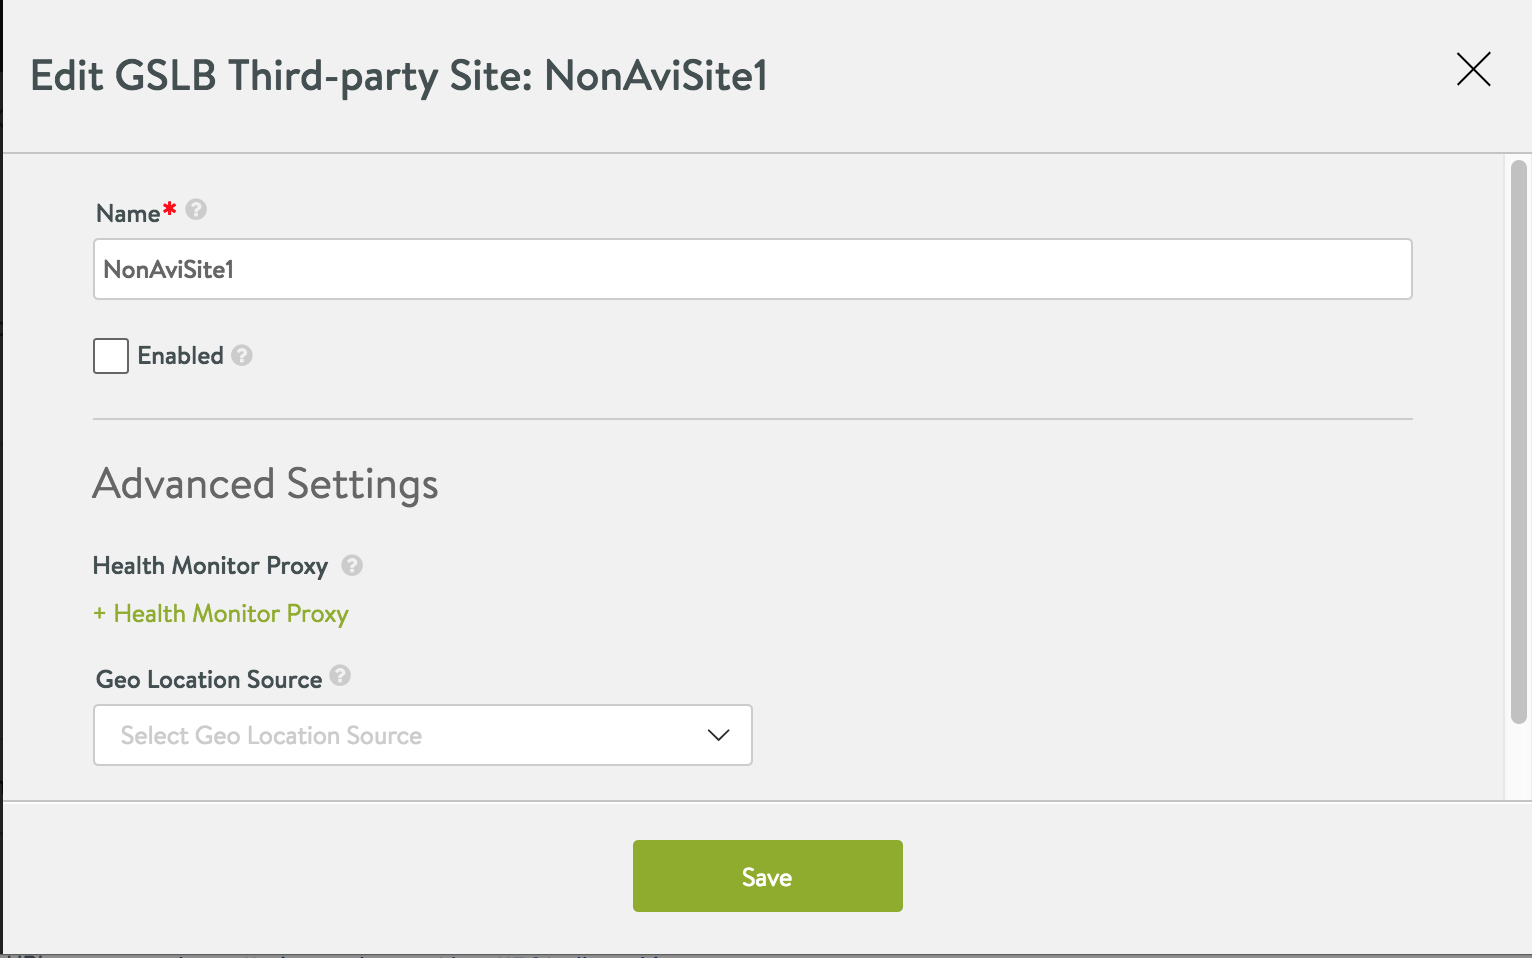 Disable a third-party GSLB site